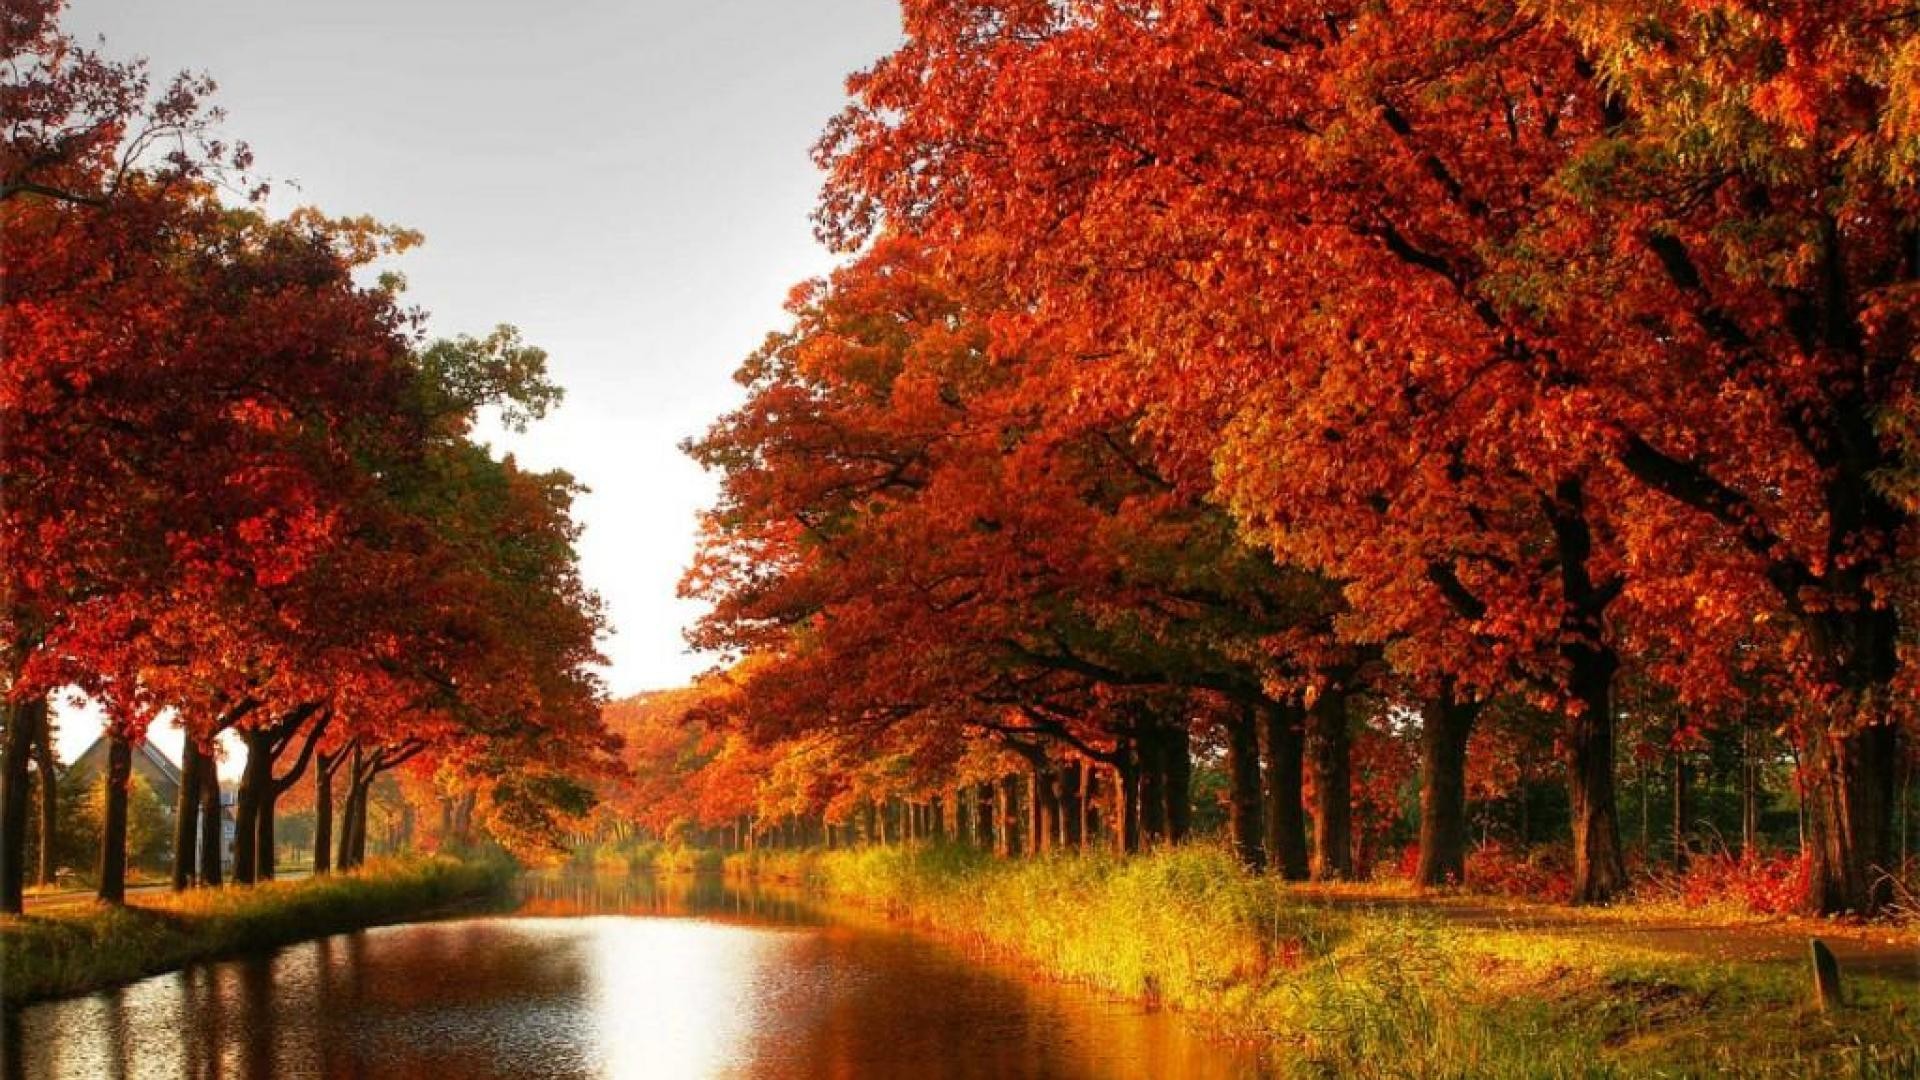 Maple trees autumn red leaves canal river forest [1920×1080] Need #iPhone  #6S #Plus #Wallpaper/ #Background for #IPhone6SPlus? Follow iPhone 6S Plu…